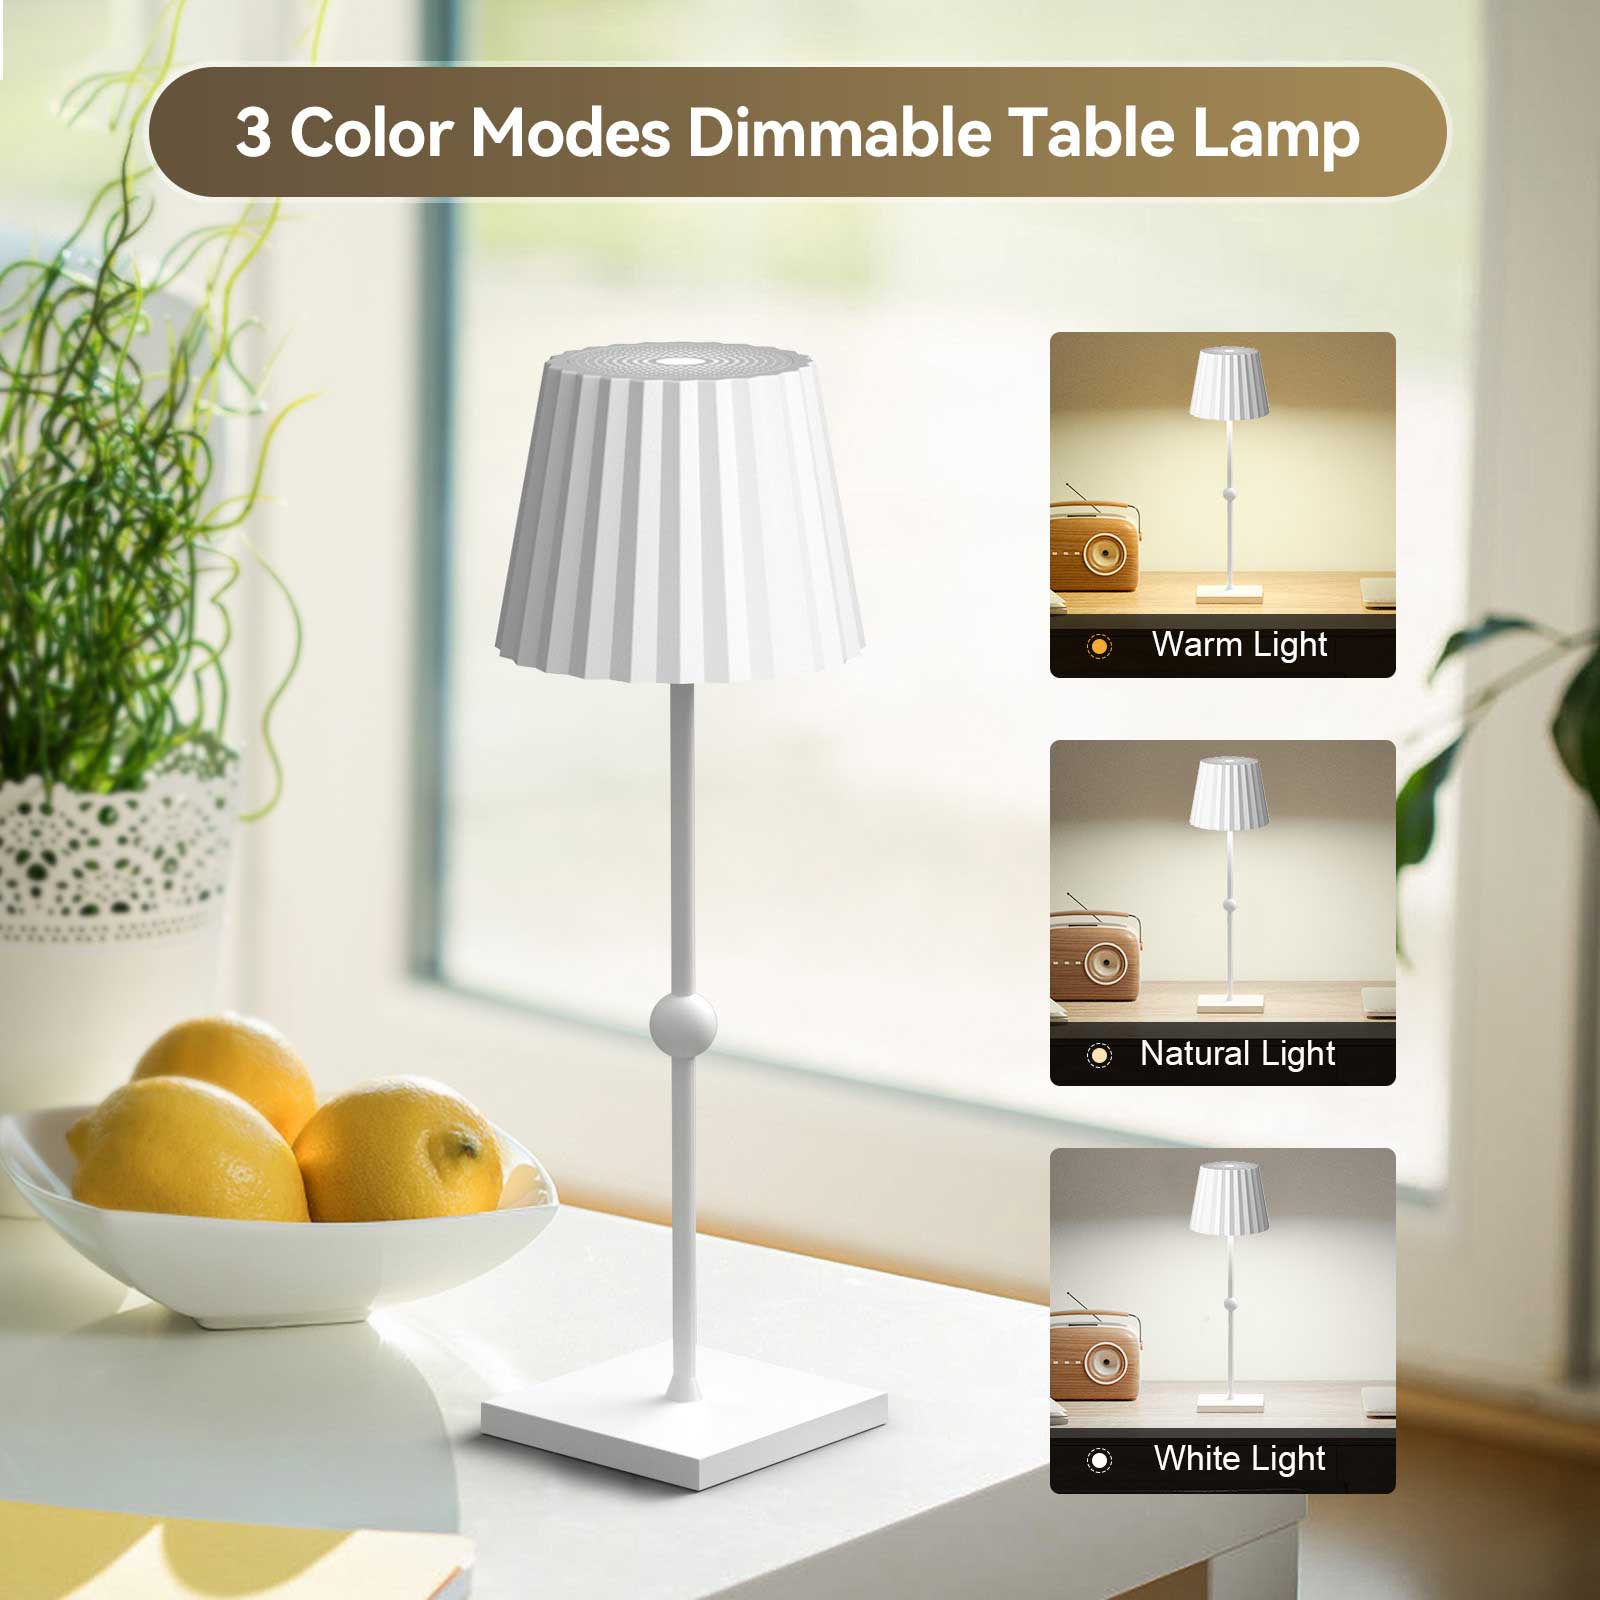 Huiveoo 3 Color Modes Dimmable Table Lamp Silva-B white